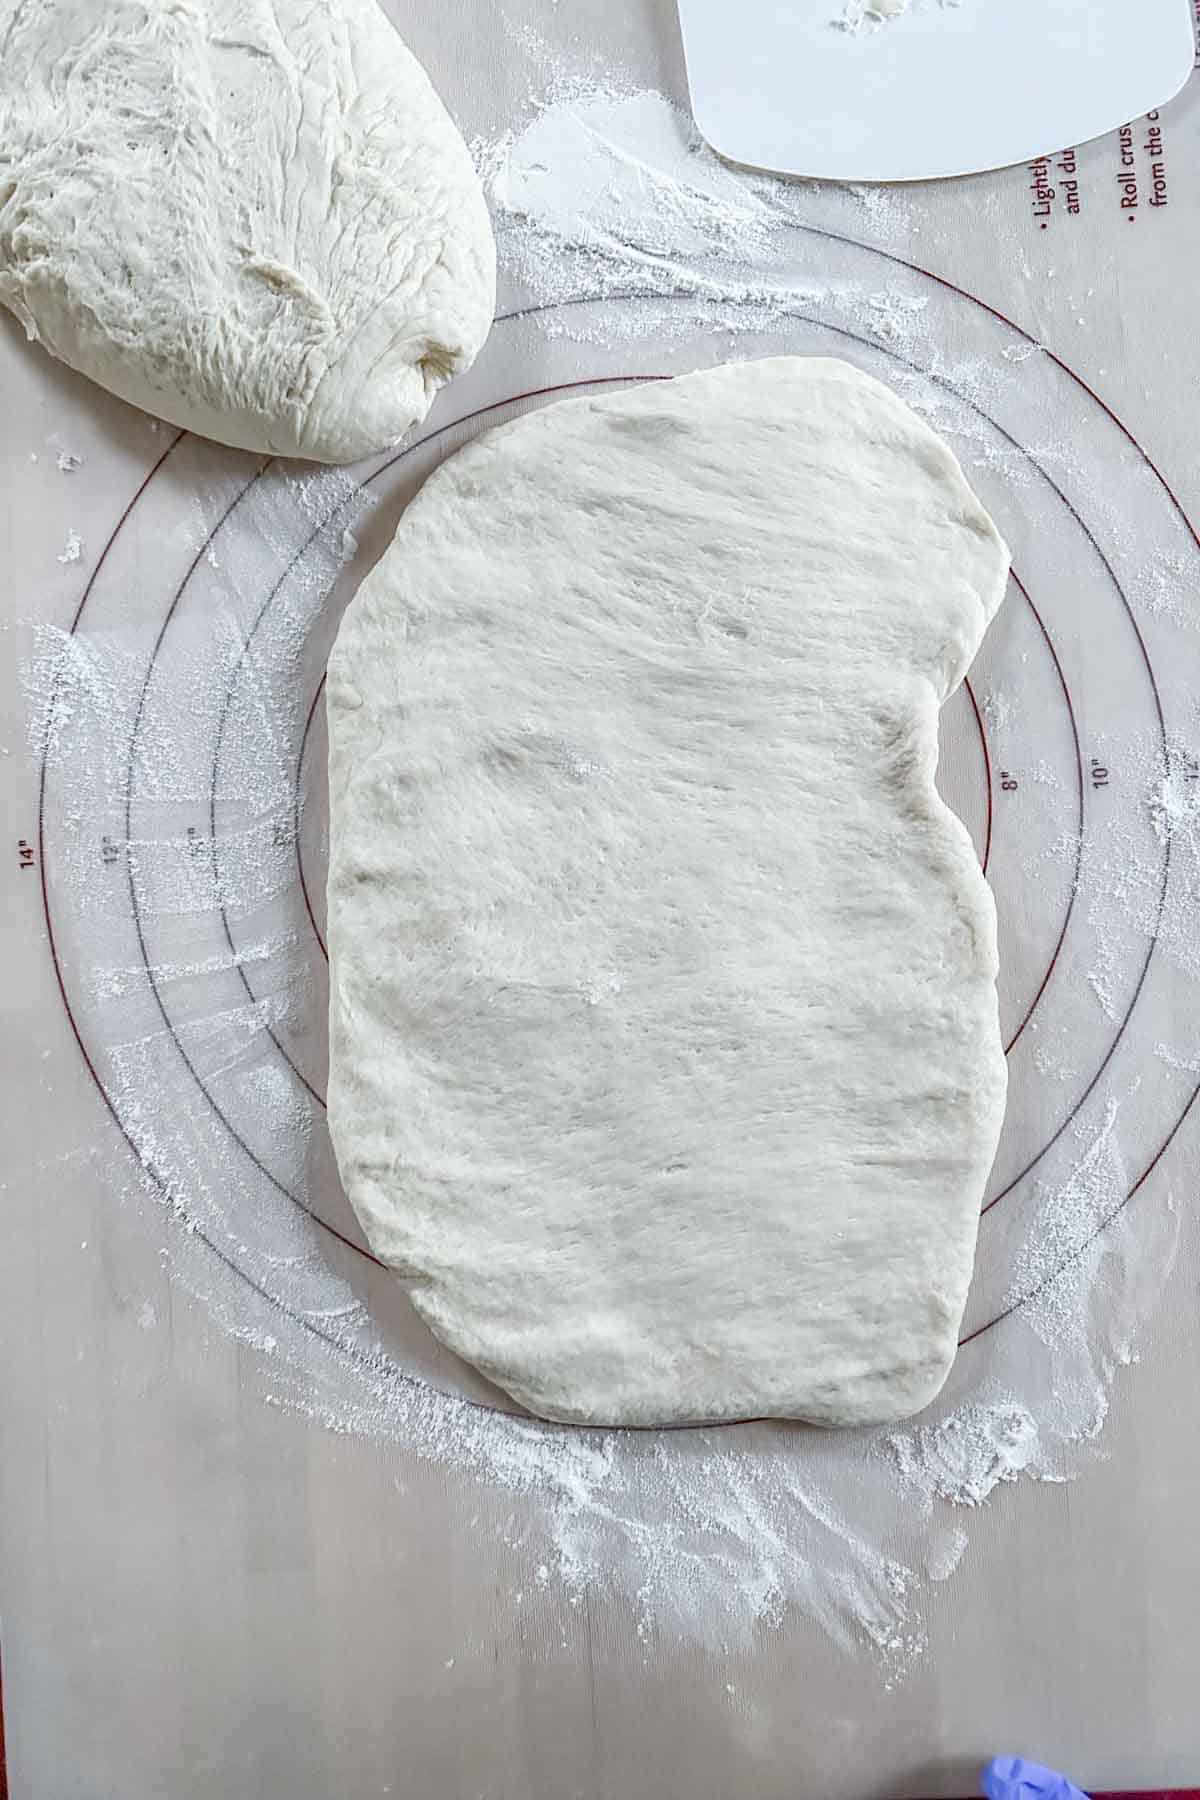 Bread dough patted into a rectangle before shaping.